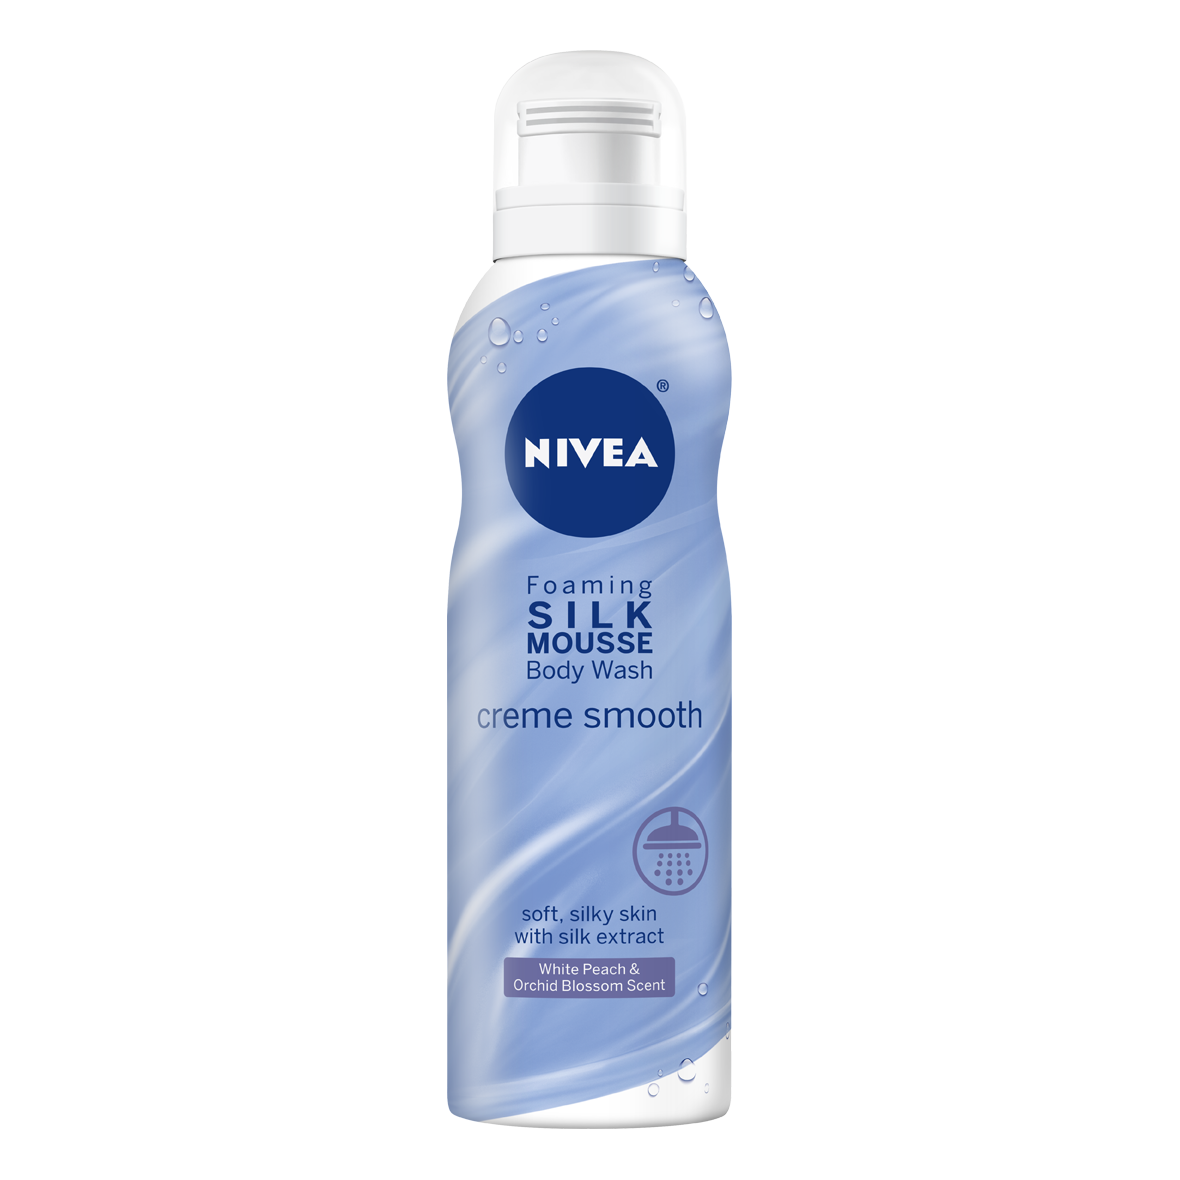 NIVEA Creme Smooth Foaming Silk Mousse Body Wash, 6.8 Ounce - image 1 of 2